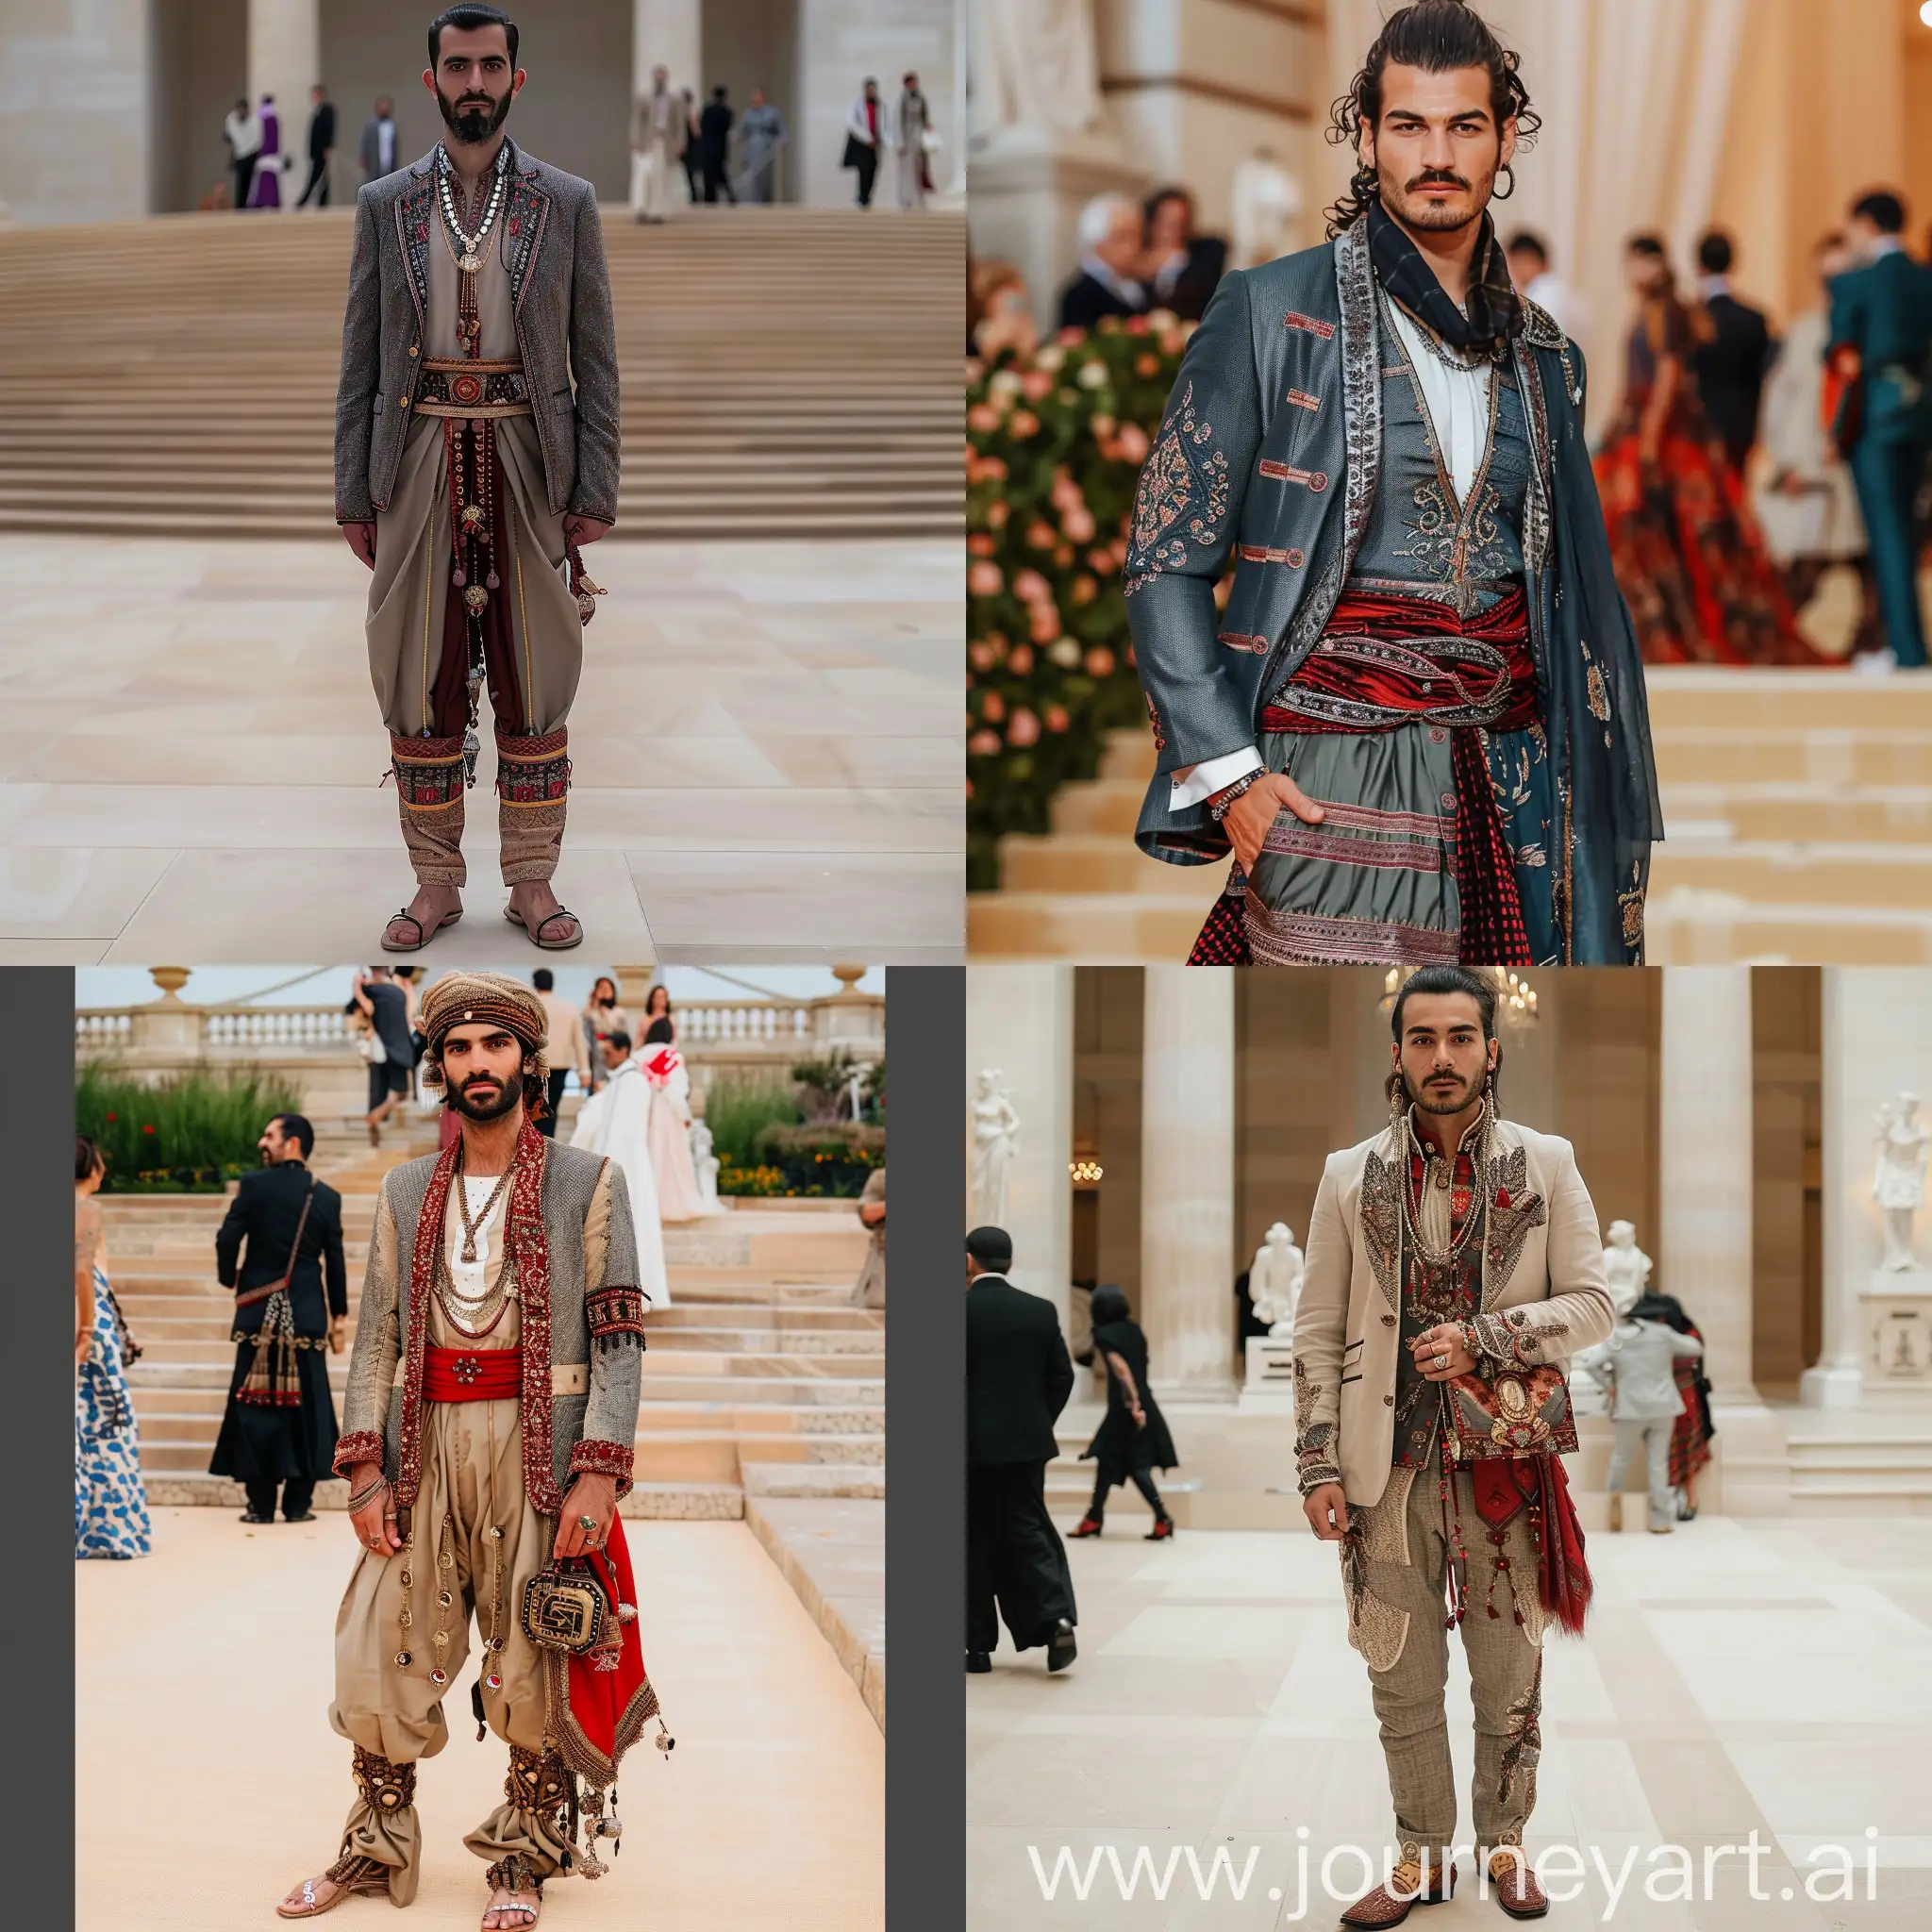 Modernized-Turkish-Traditional-Outfit-at-Met-Gala